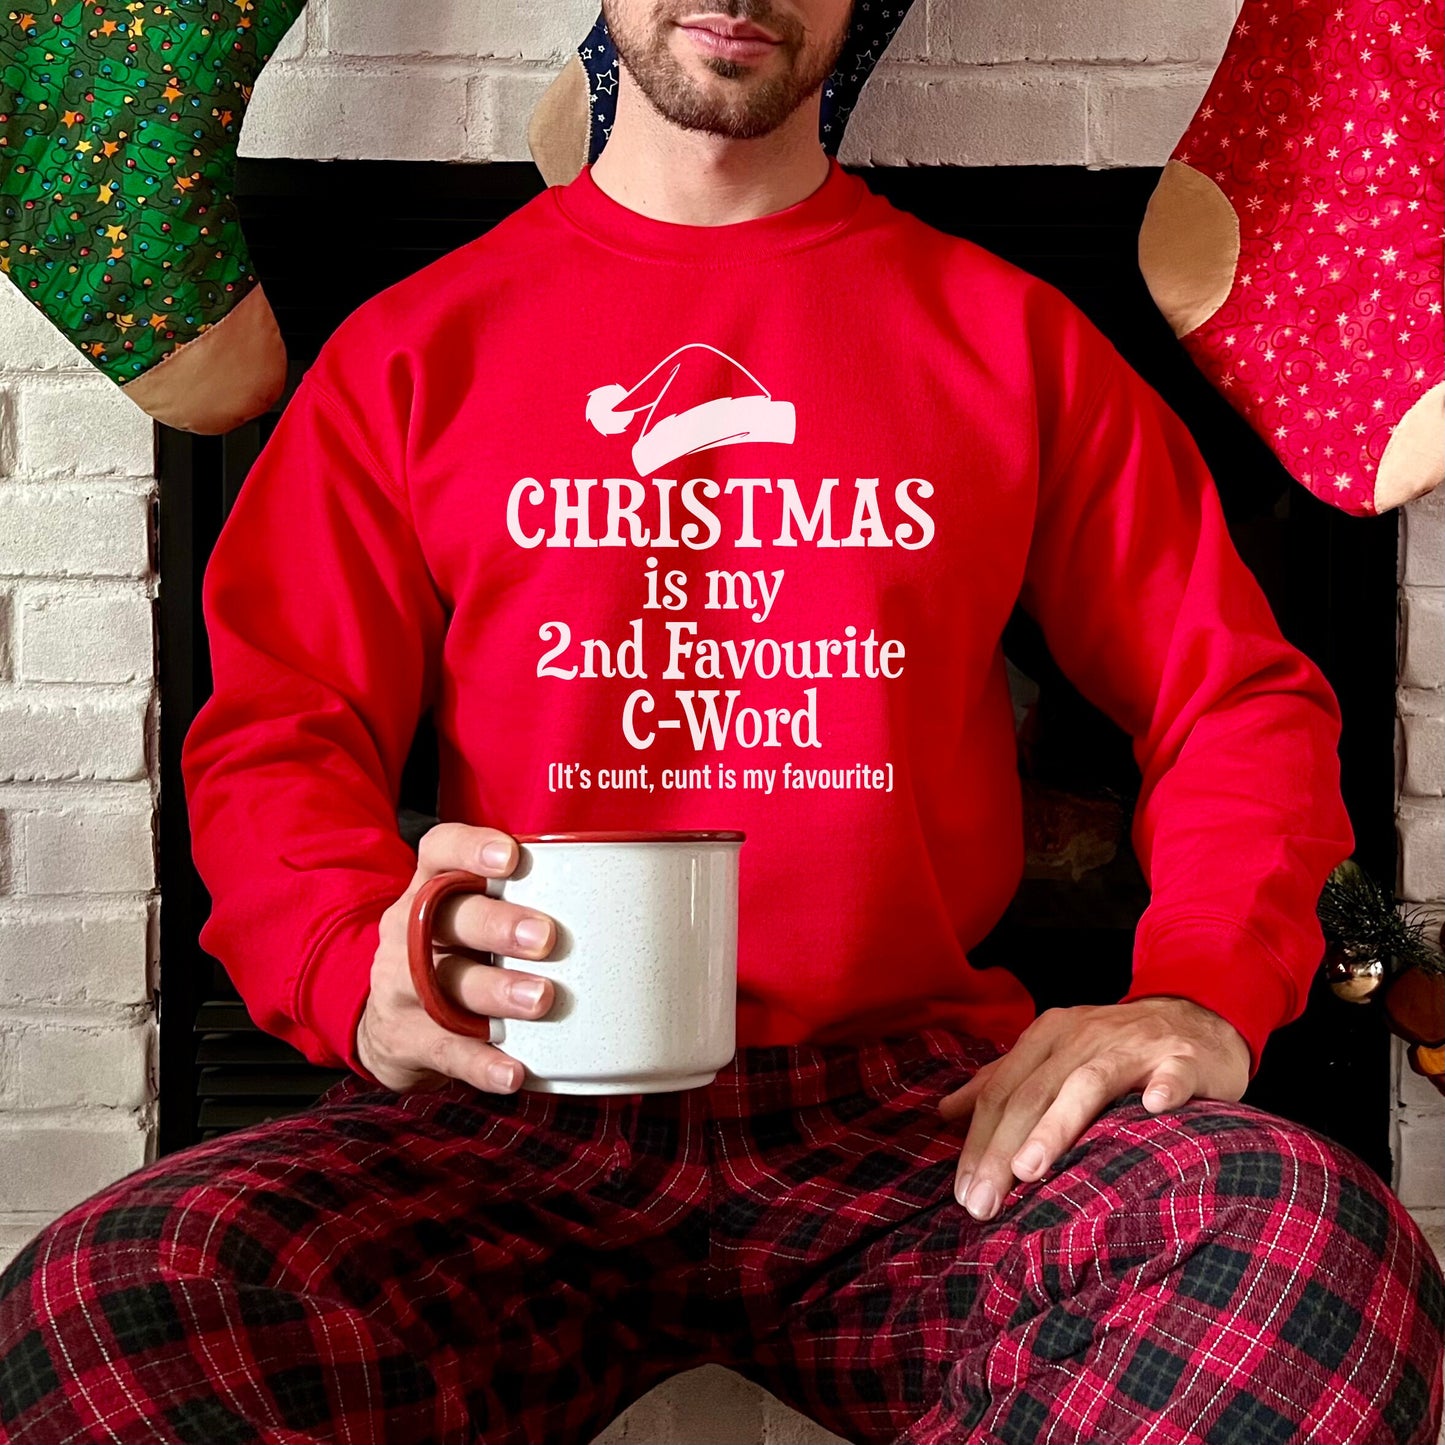 Christmas is my 2nd favourite C-Word JH030 Funny Rude and Offensive Christmas Jumper Sweater